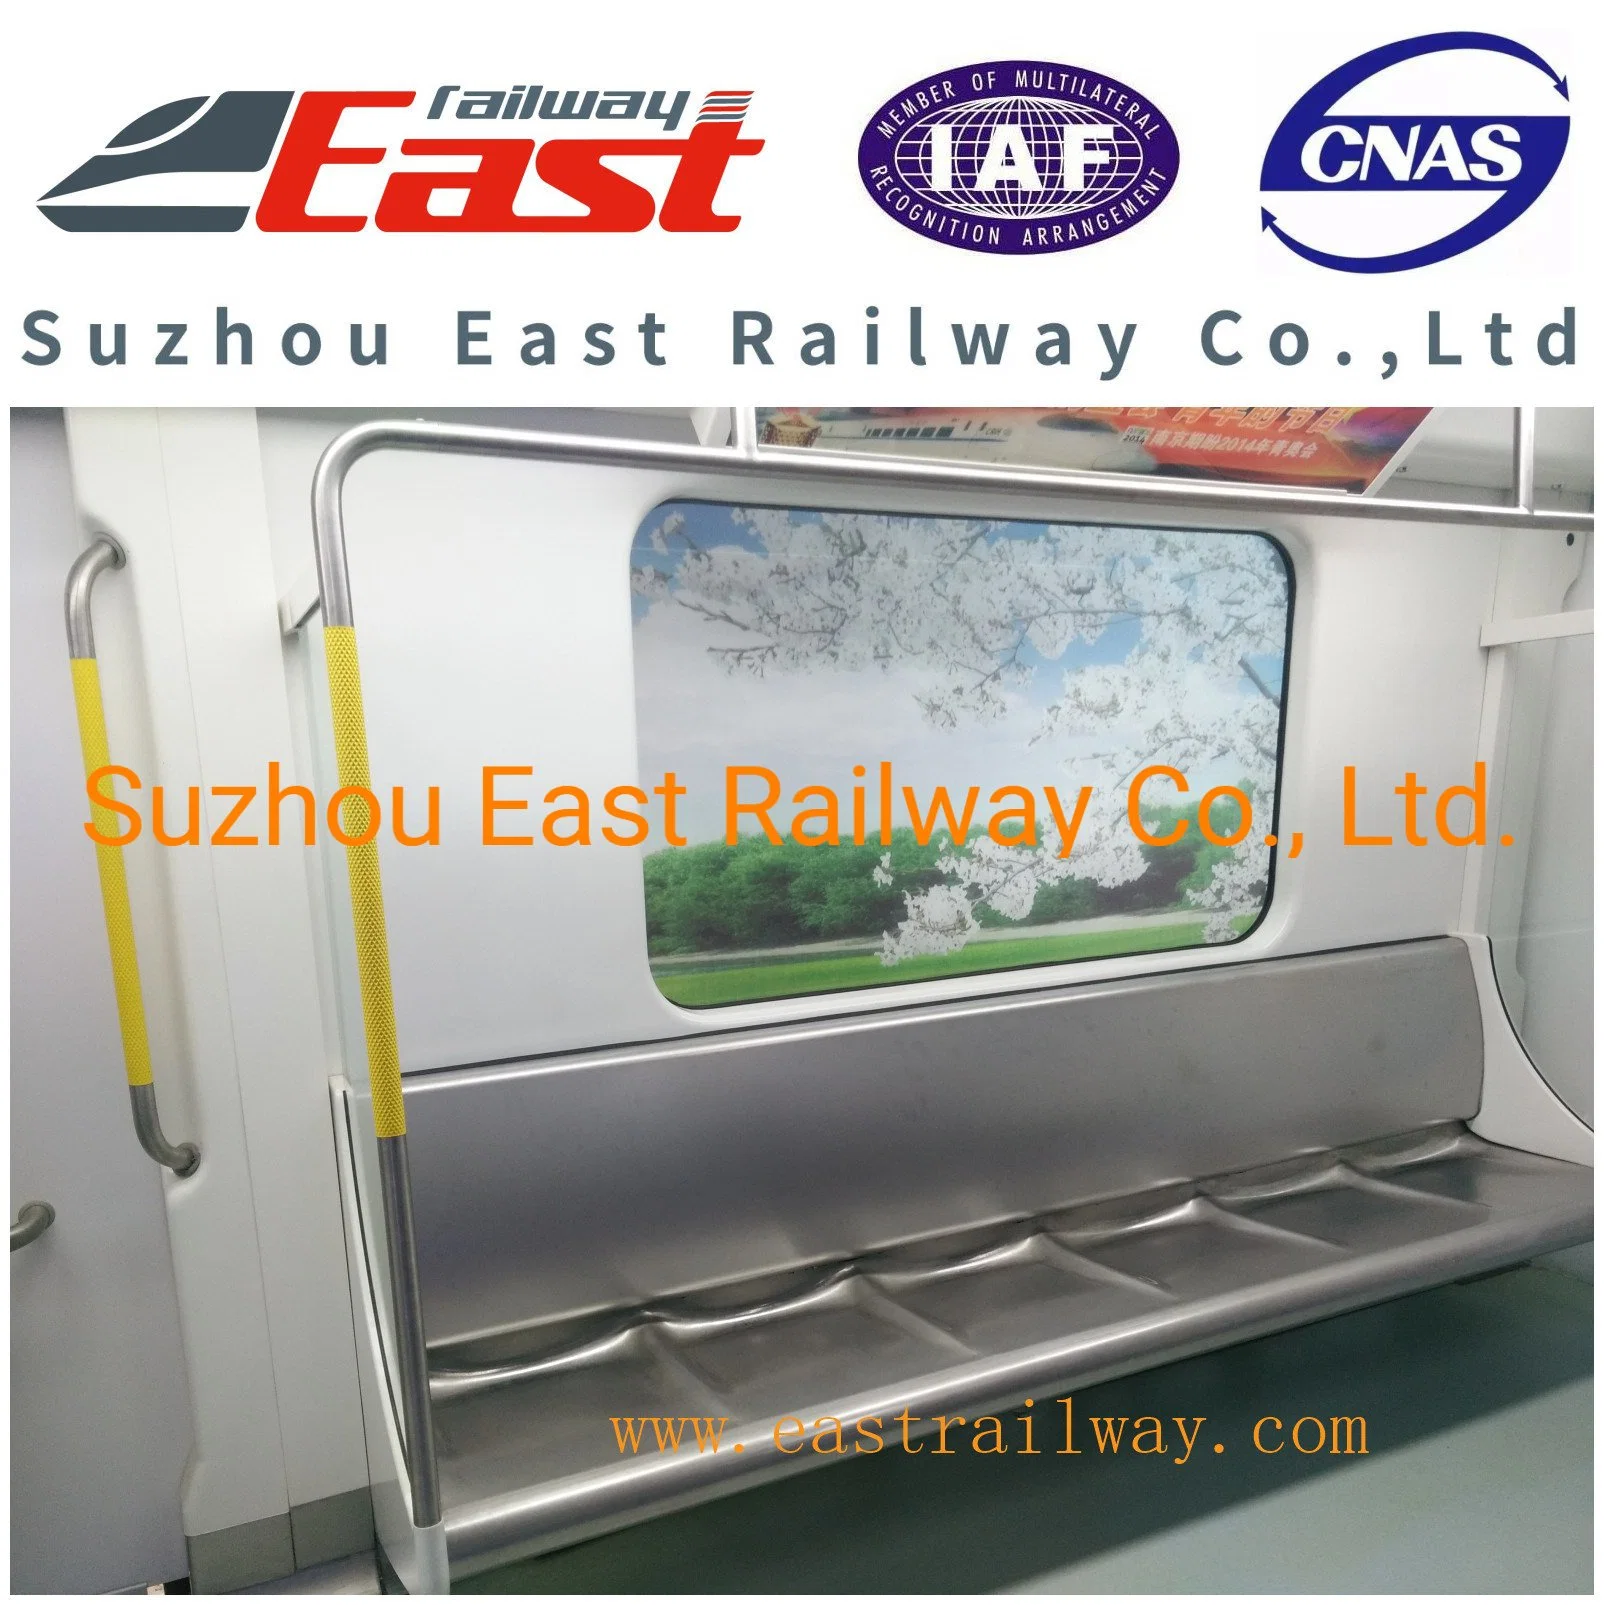 Eastrailway Gfrp/FRP Seat for Railway Passenger Vehicle Car Spare Parts